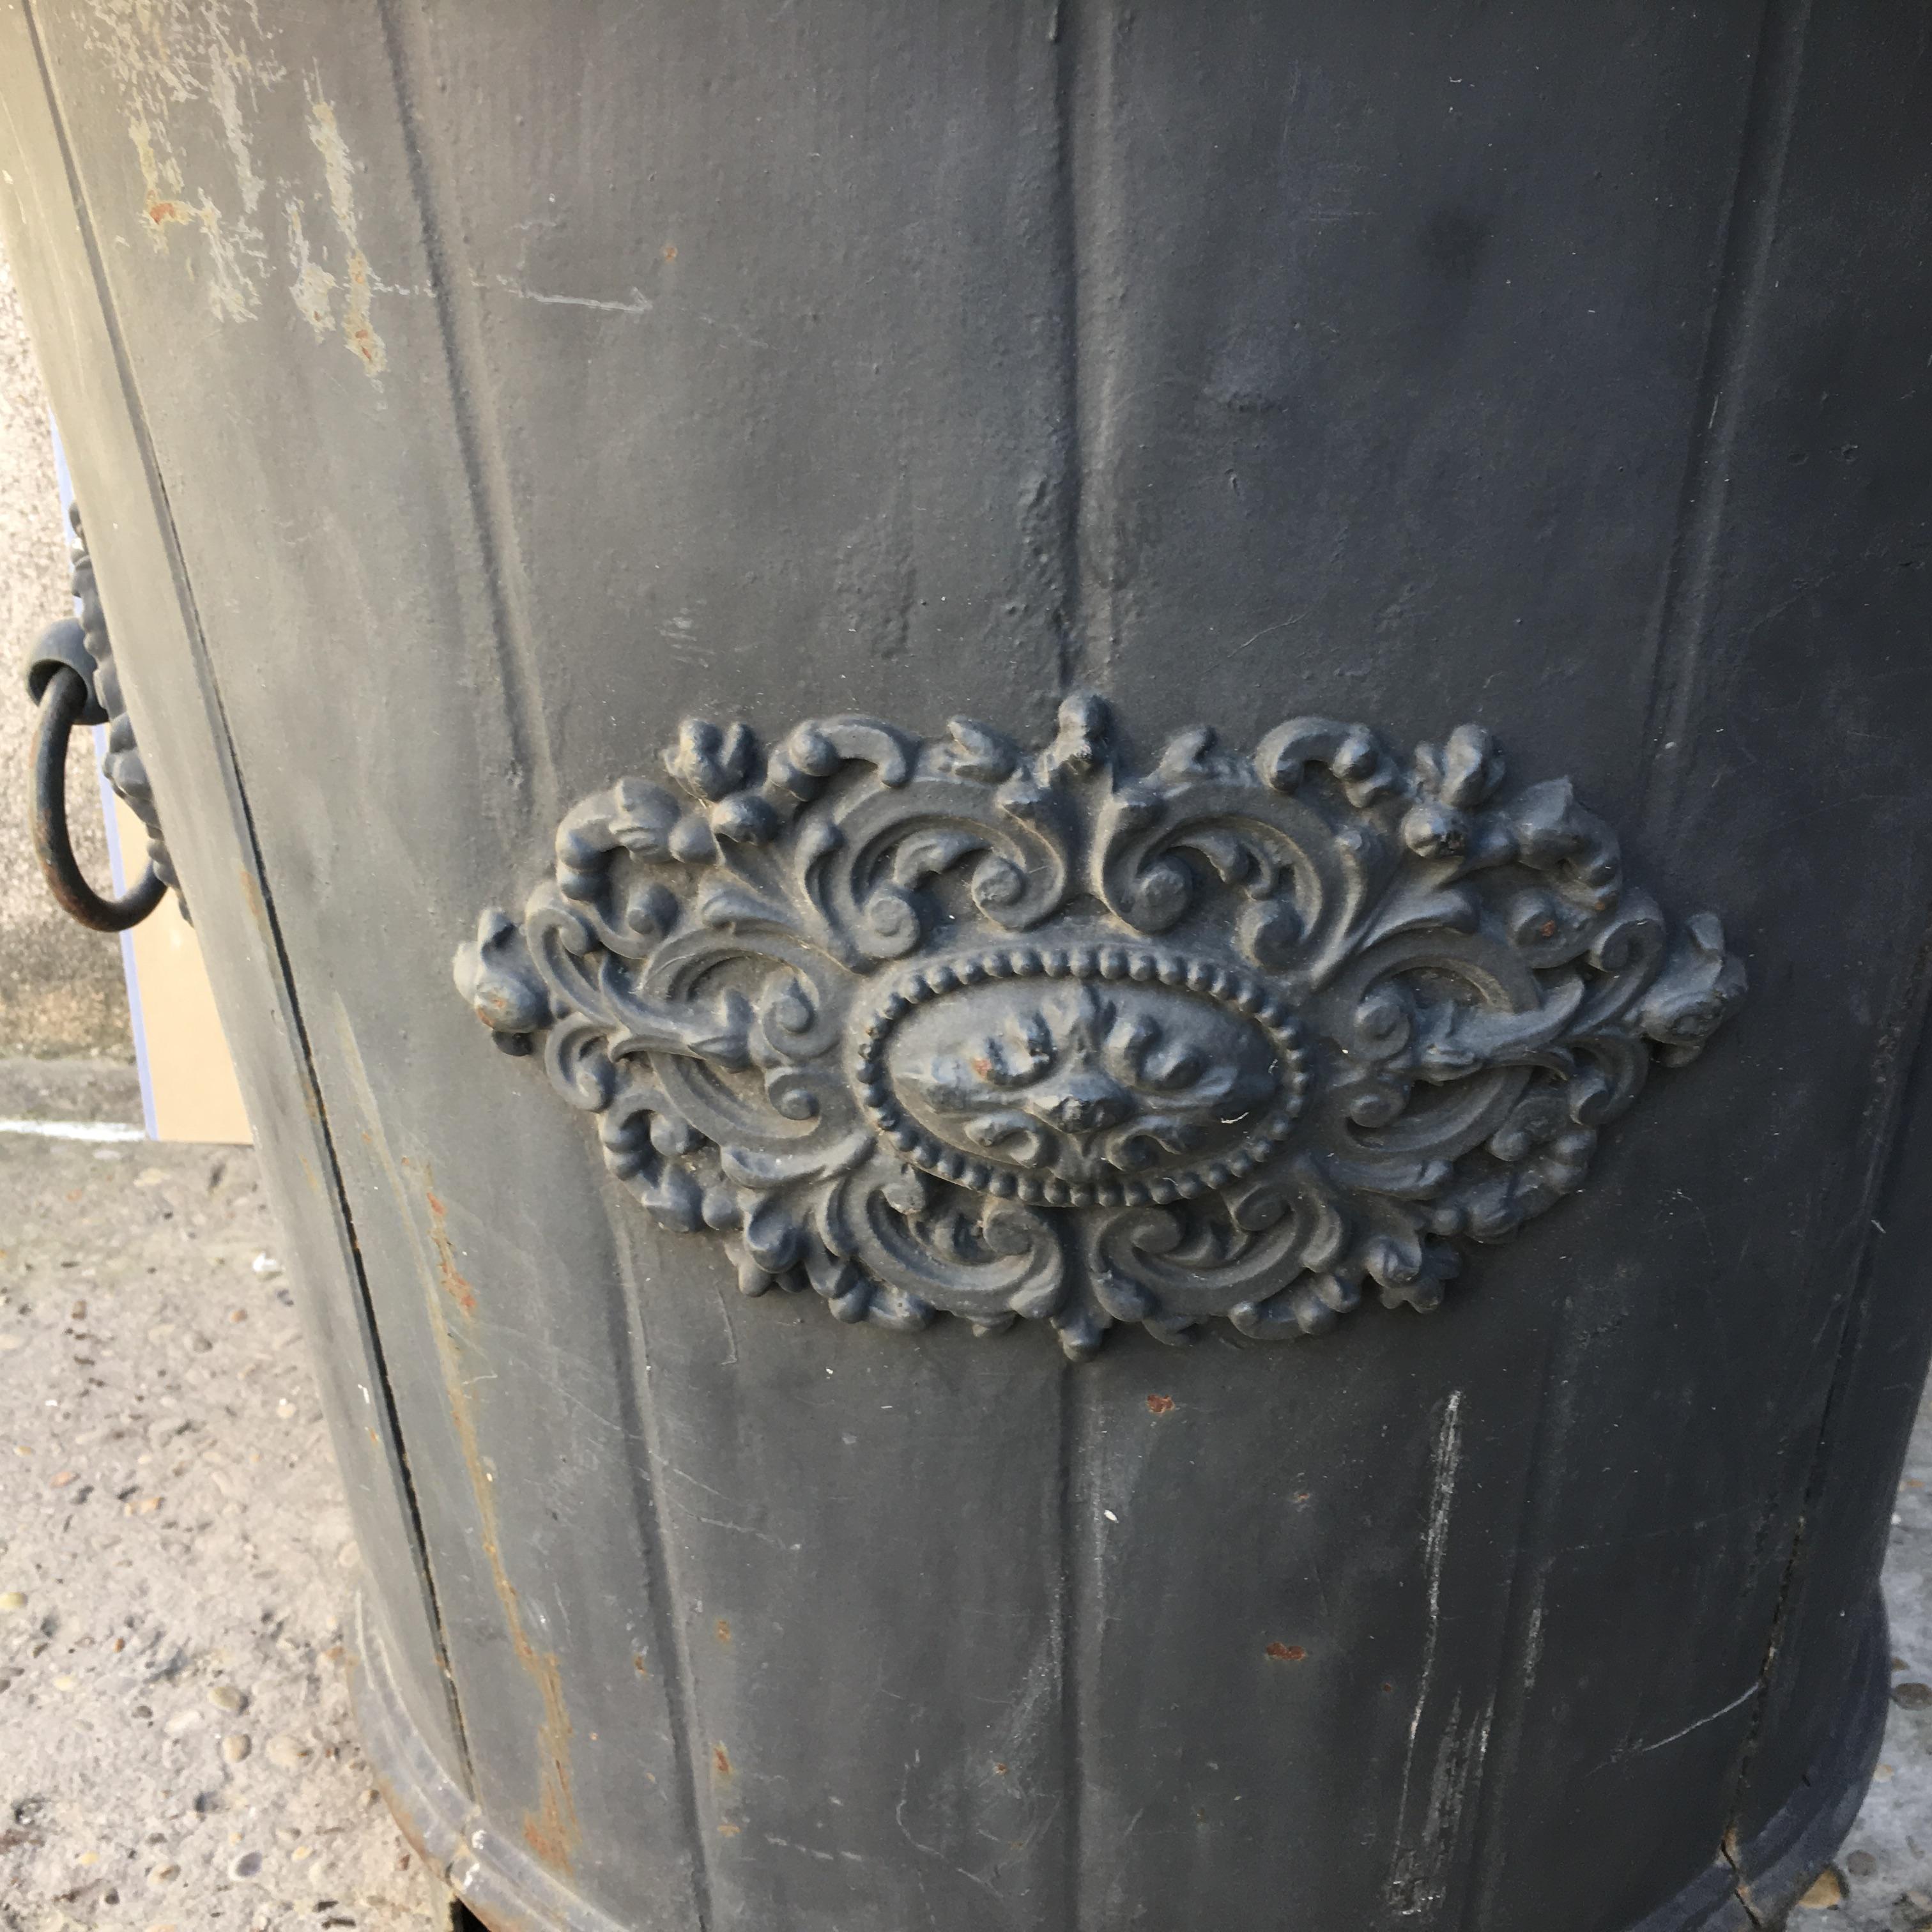 An elegant French cast iron garden planter or urn with a stunning blue green patina. Beautiful slate blue color. Decorative designs on all 4 sides with two handles. Strong supporting feet below the base.

This beautiful planter originates from a